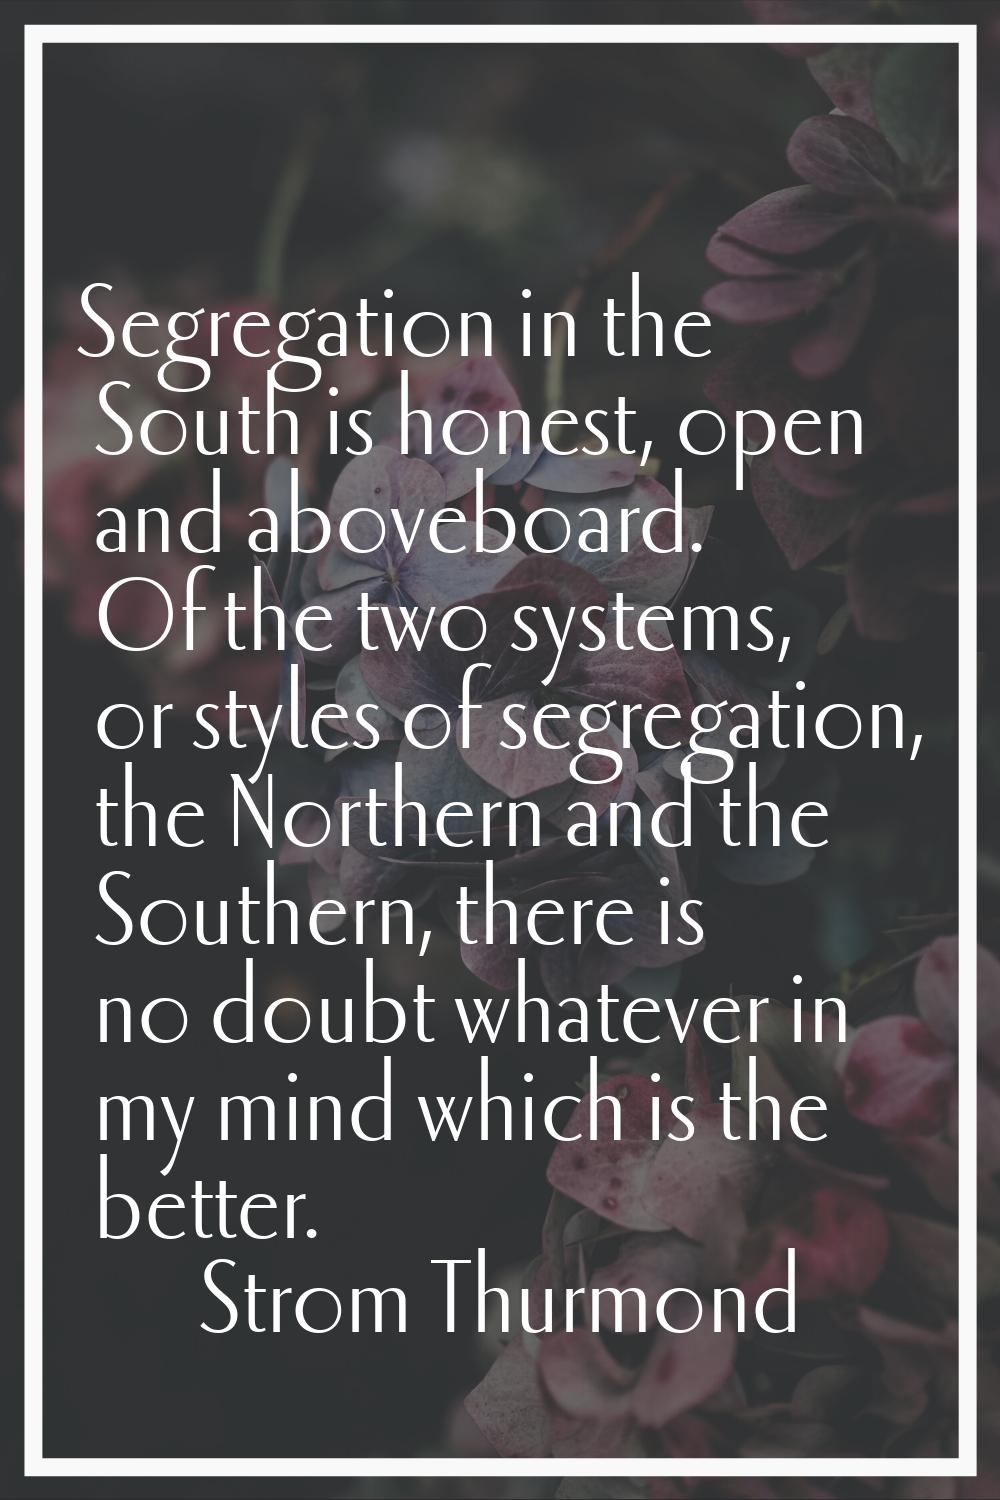 Segregation in the South is honest, open and aboveboard. Of the two systems, or styles of segregati